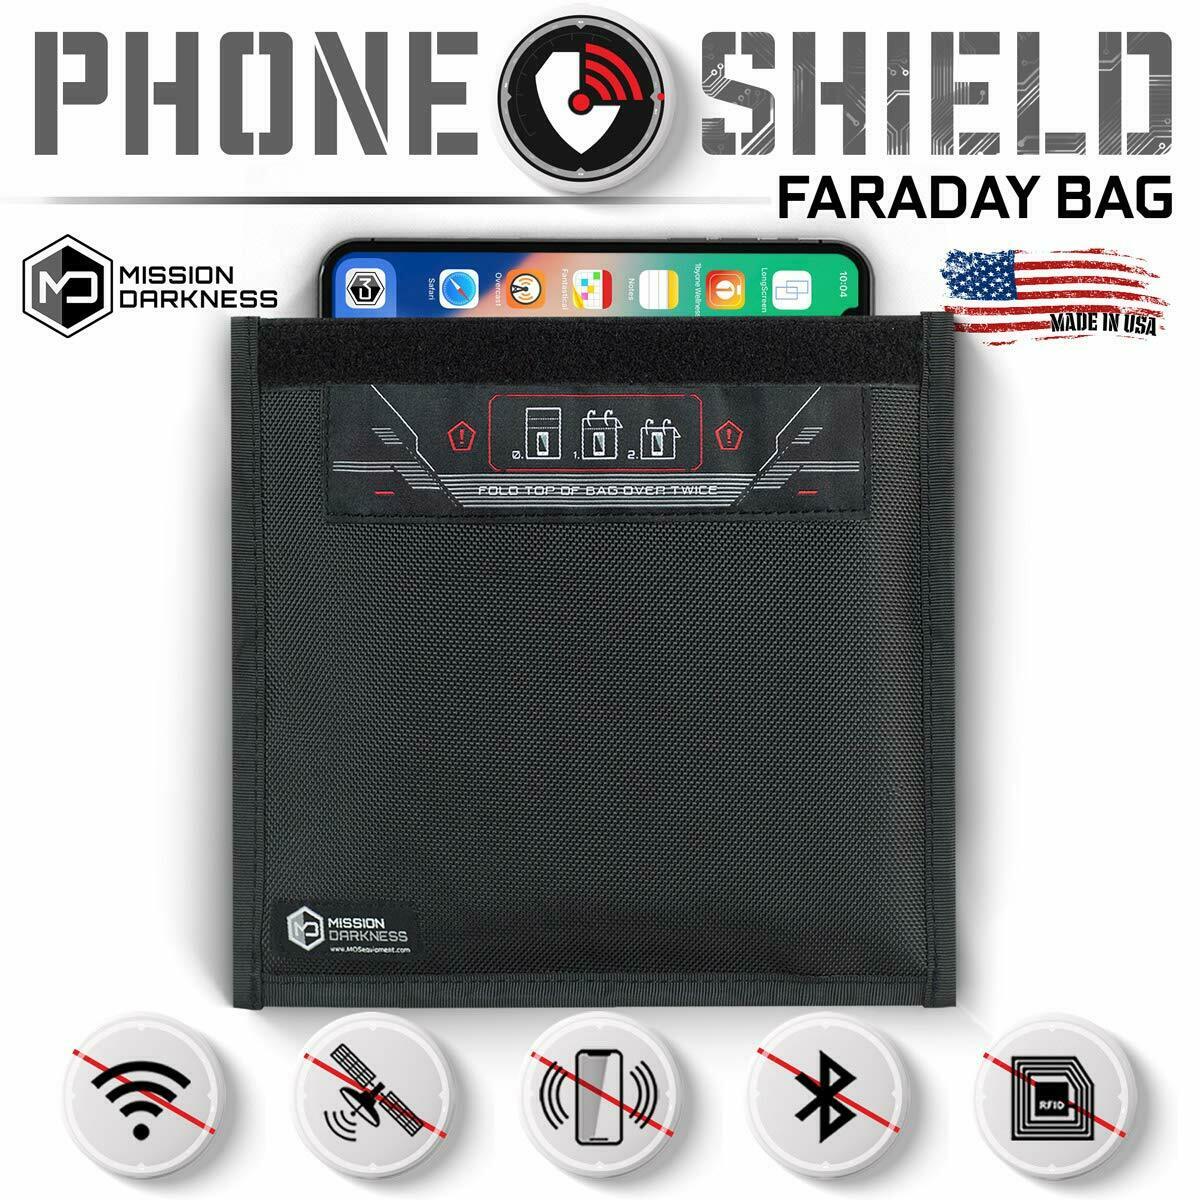 Mission Darkness Small Non-Window Faraday Bag for Phones